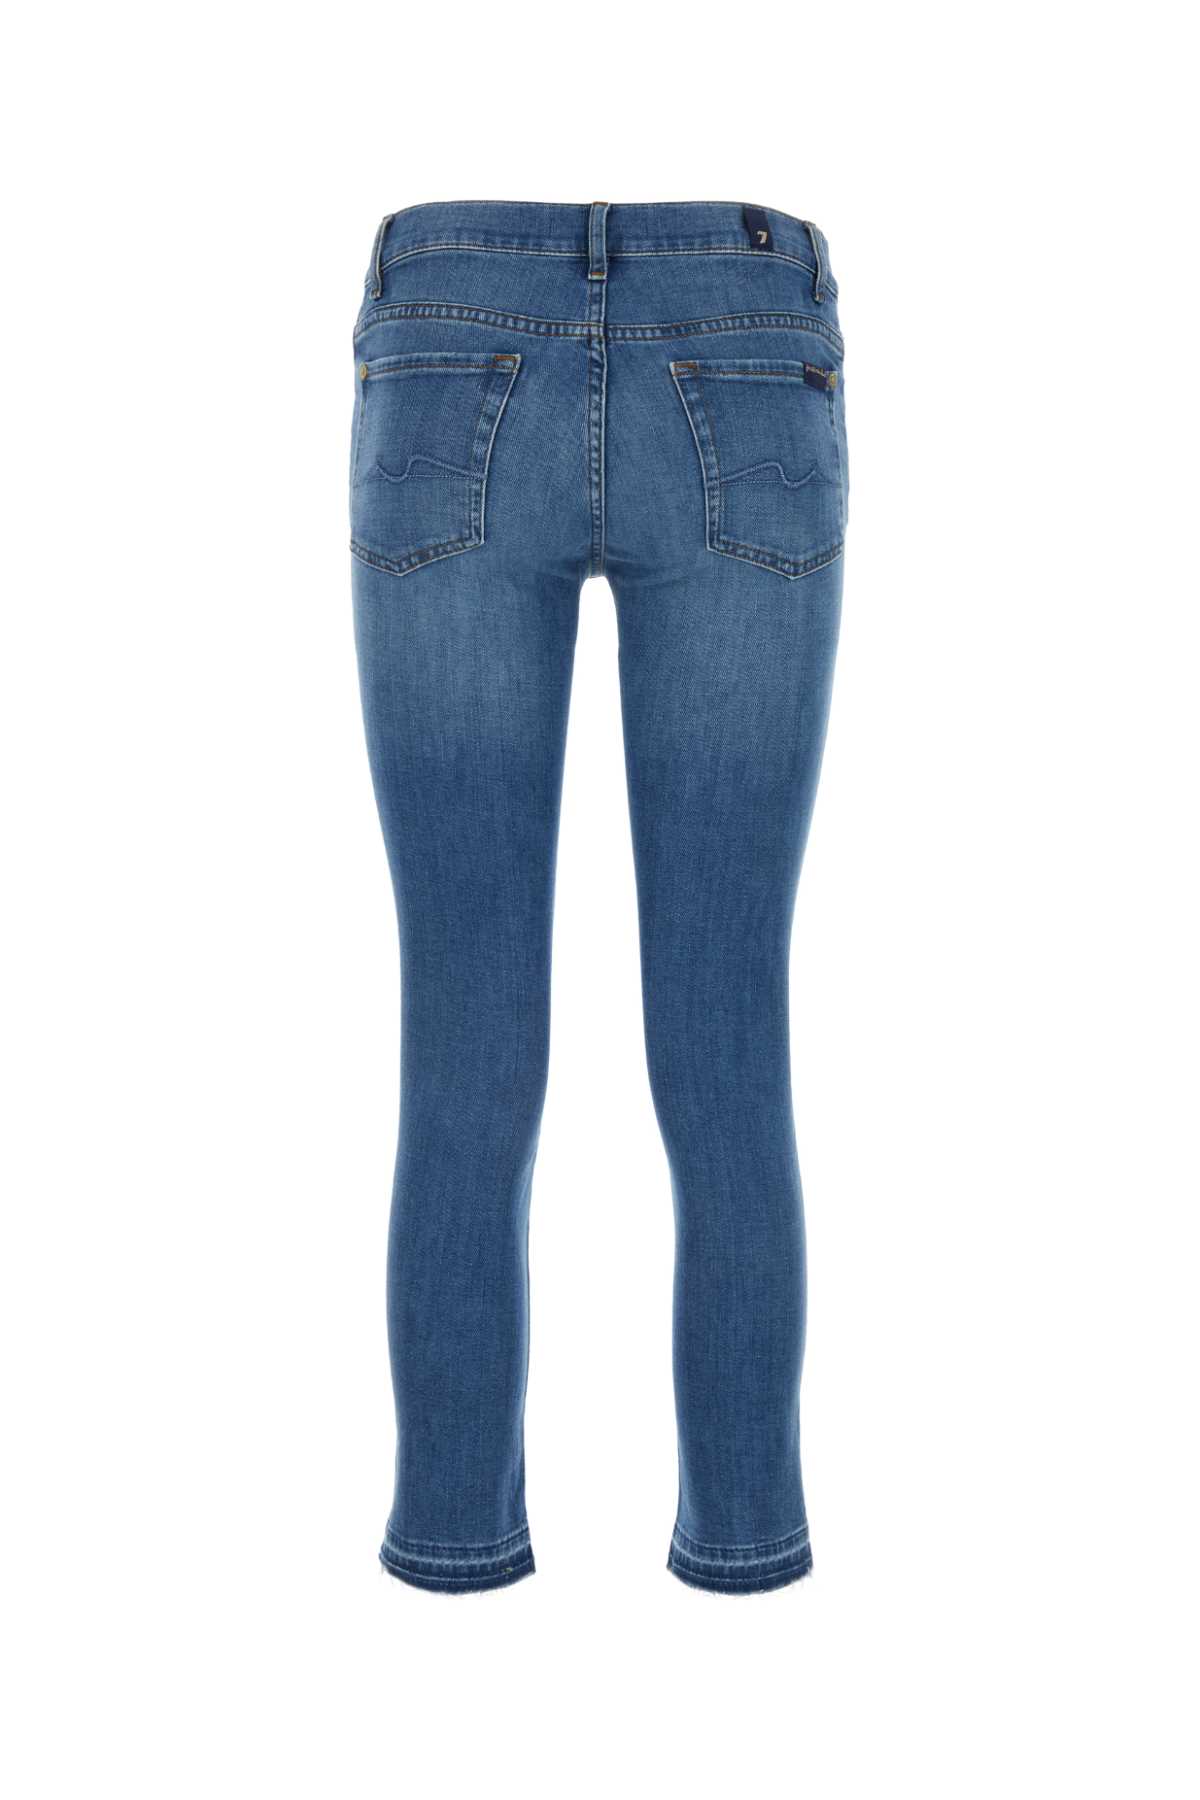 7 For All Mankind Stretch Denim Roxanne Jeans In Lavaggioscuro